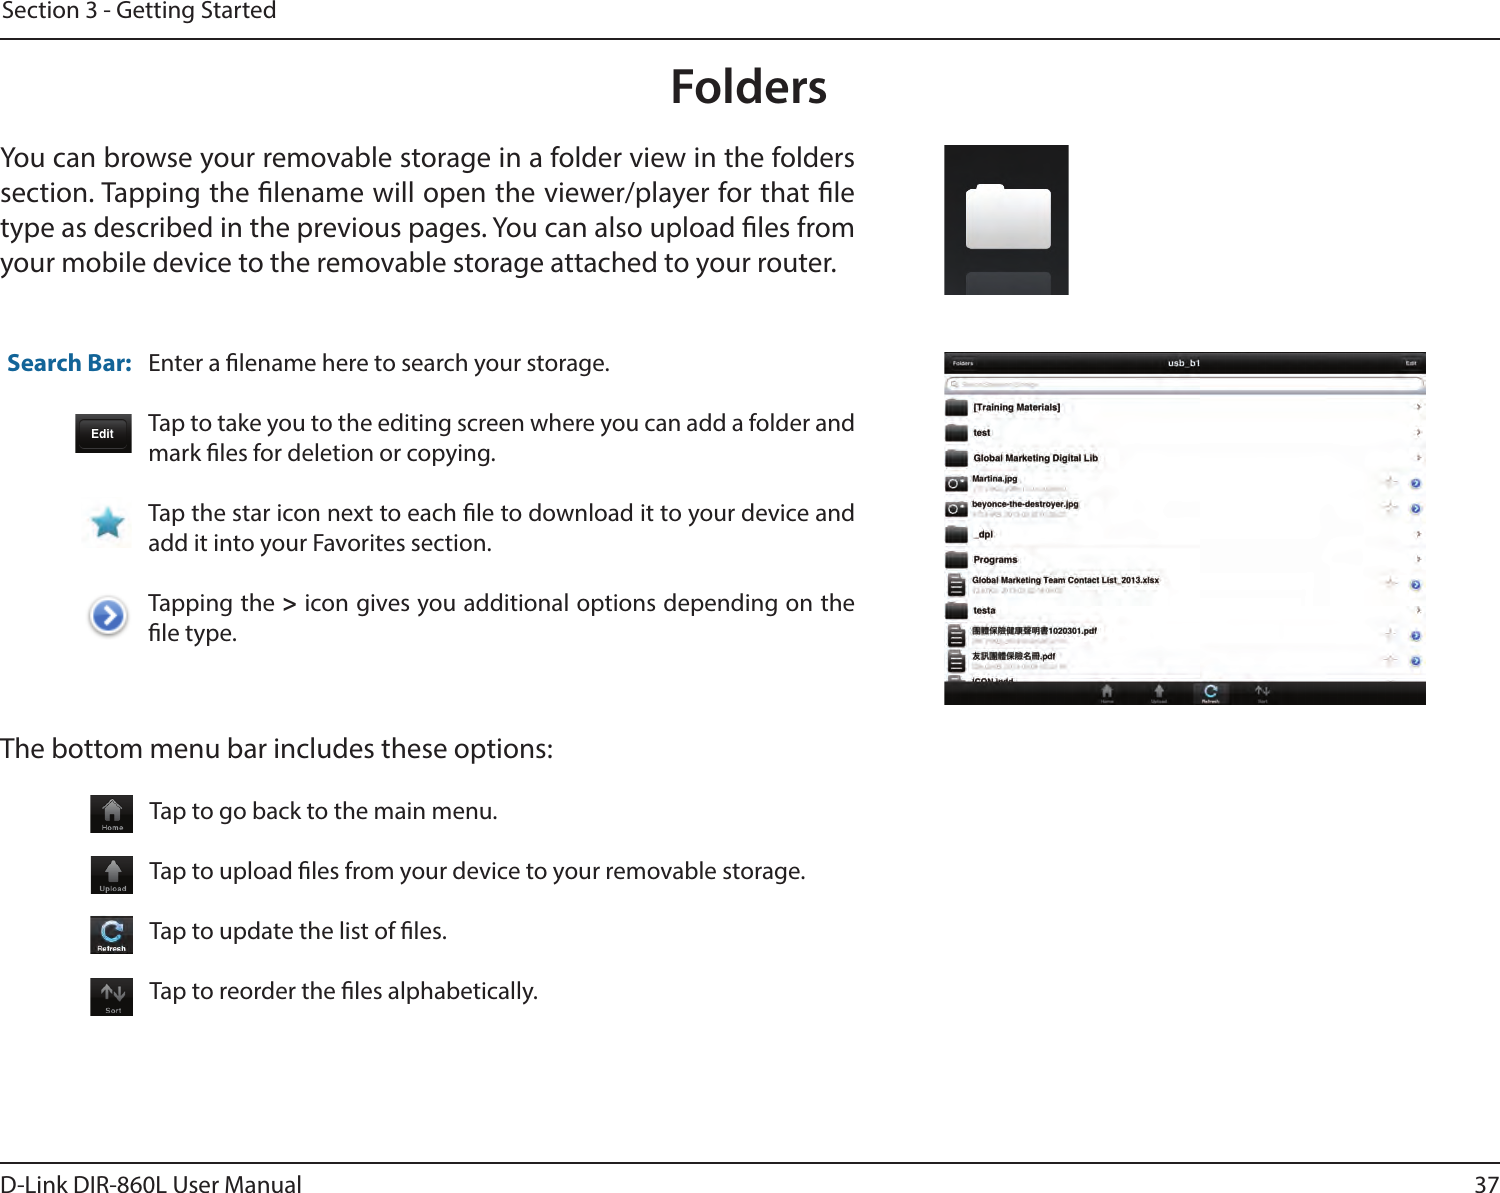 37D-Link DIR-860L User ManualSection 3 - Getting StartedFoldersYou can browse your removable storage in a folder view in the folders section. Tapping the lename will open the viewer/player for that le type as described in the previous pages. You can also upload les from your mobile device to the removable storage attached to your router.Enter a lename here to search your storage.Tap to take you to the editing screen where you can add a folder and mark les for deletion or copying.Tap the star icon next to each le to download it to your device and add it into your Favorites section.Tapping the &gt; icon gives you additional options depending on the le type.Search Bar:The bottom menu bar includes these options:Tap to go back to the main menu.Tap to upload les from your device to your removable storage.Tap to update the list of les.Tap to reorder the les alphabetically.